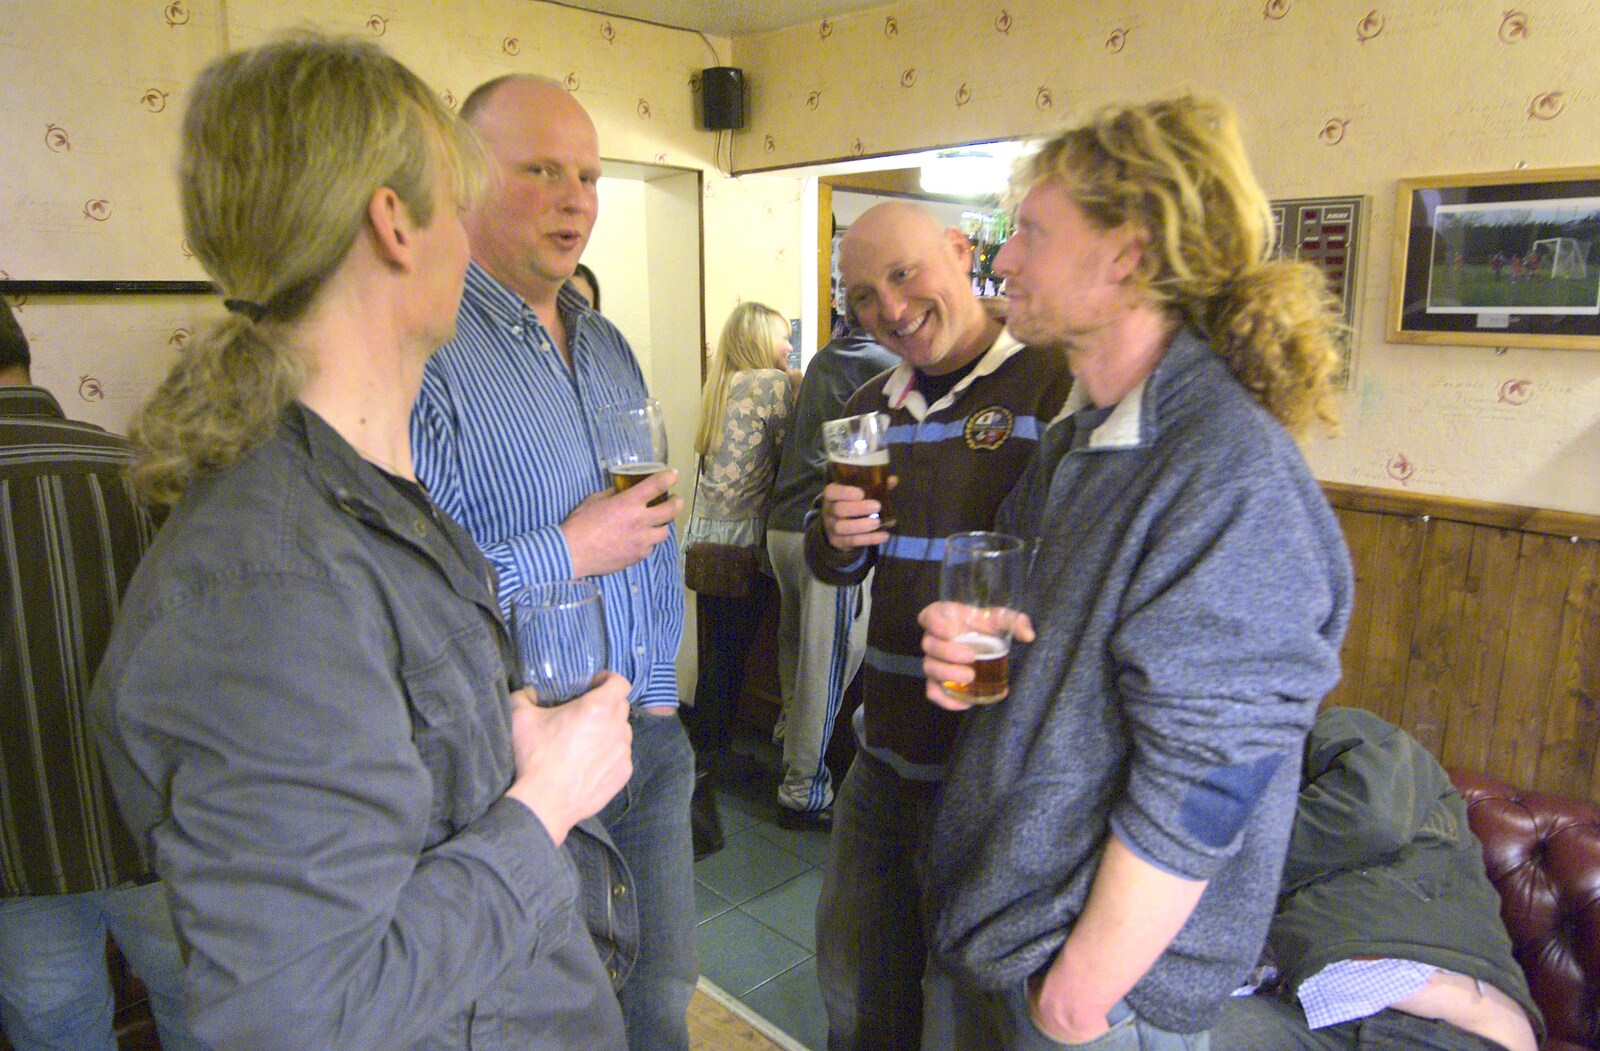 Jimmy, Tim, Gov and Wavy from The Cherry Tree Beer Festival, Yaxley, Suffolk - 4th February 2011